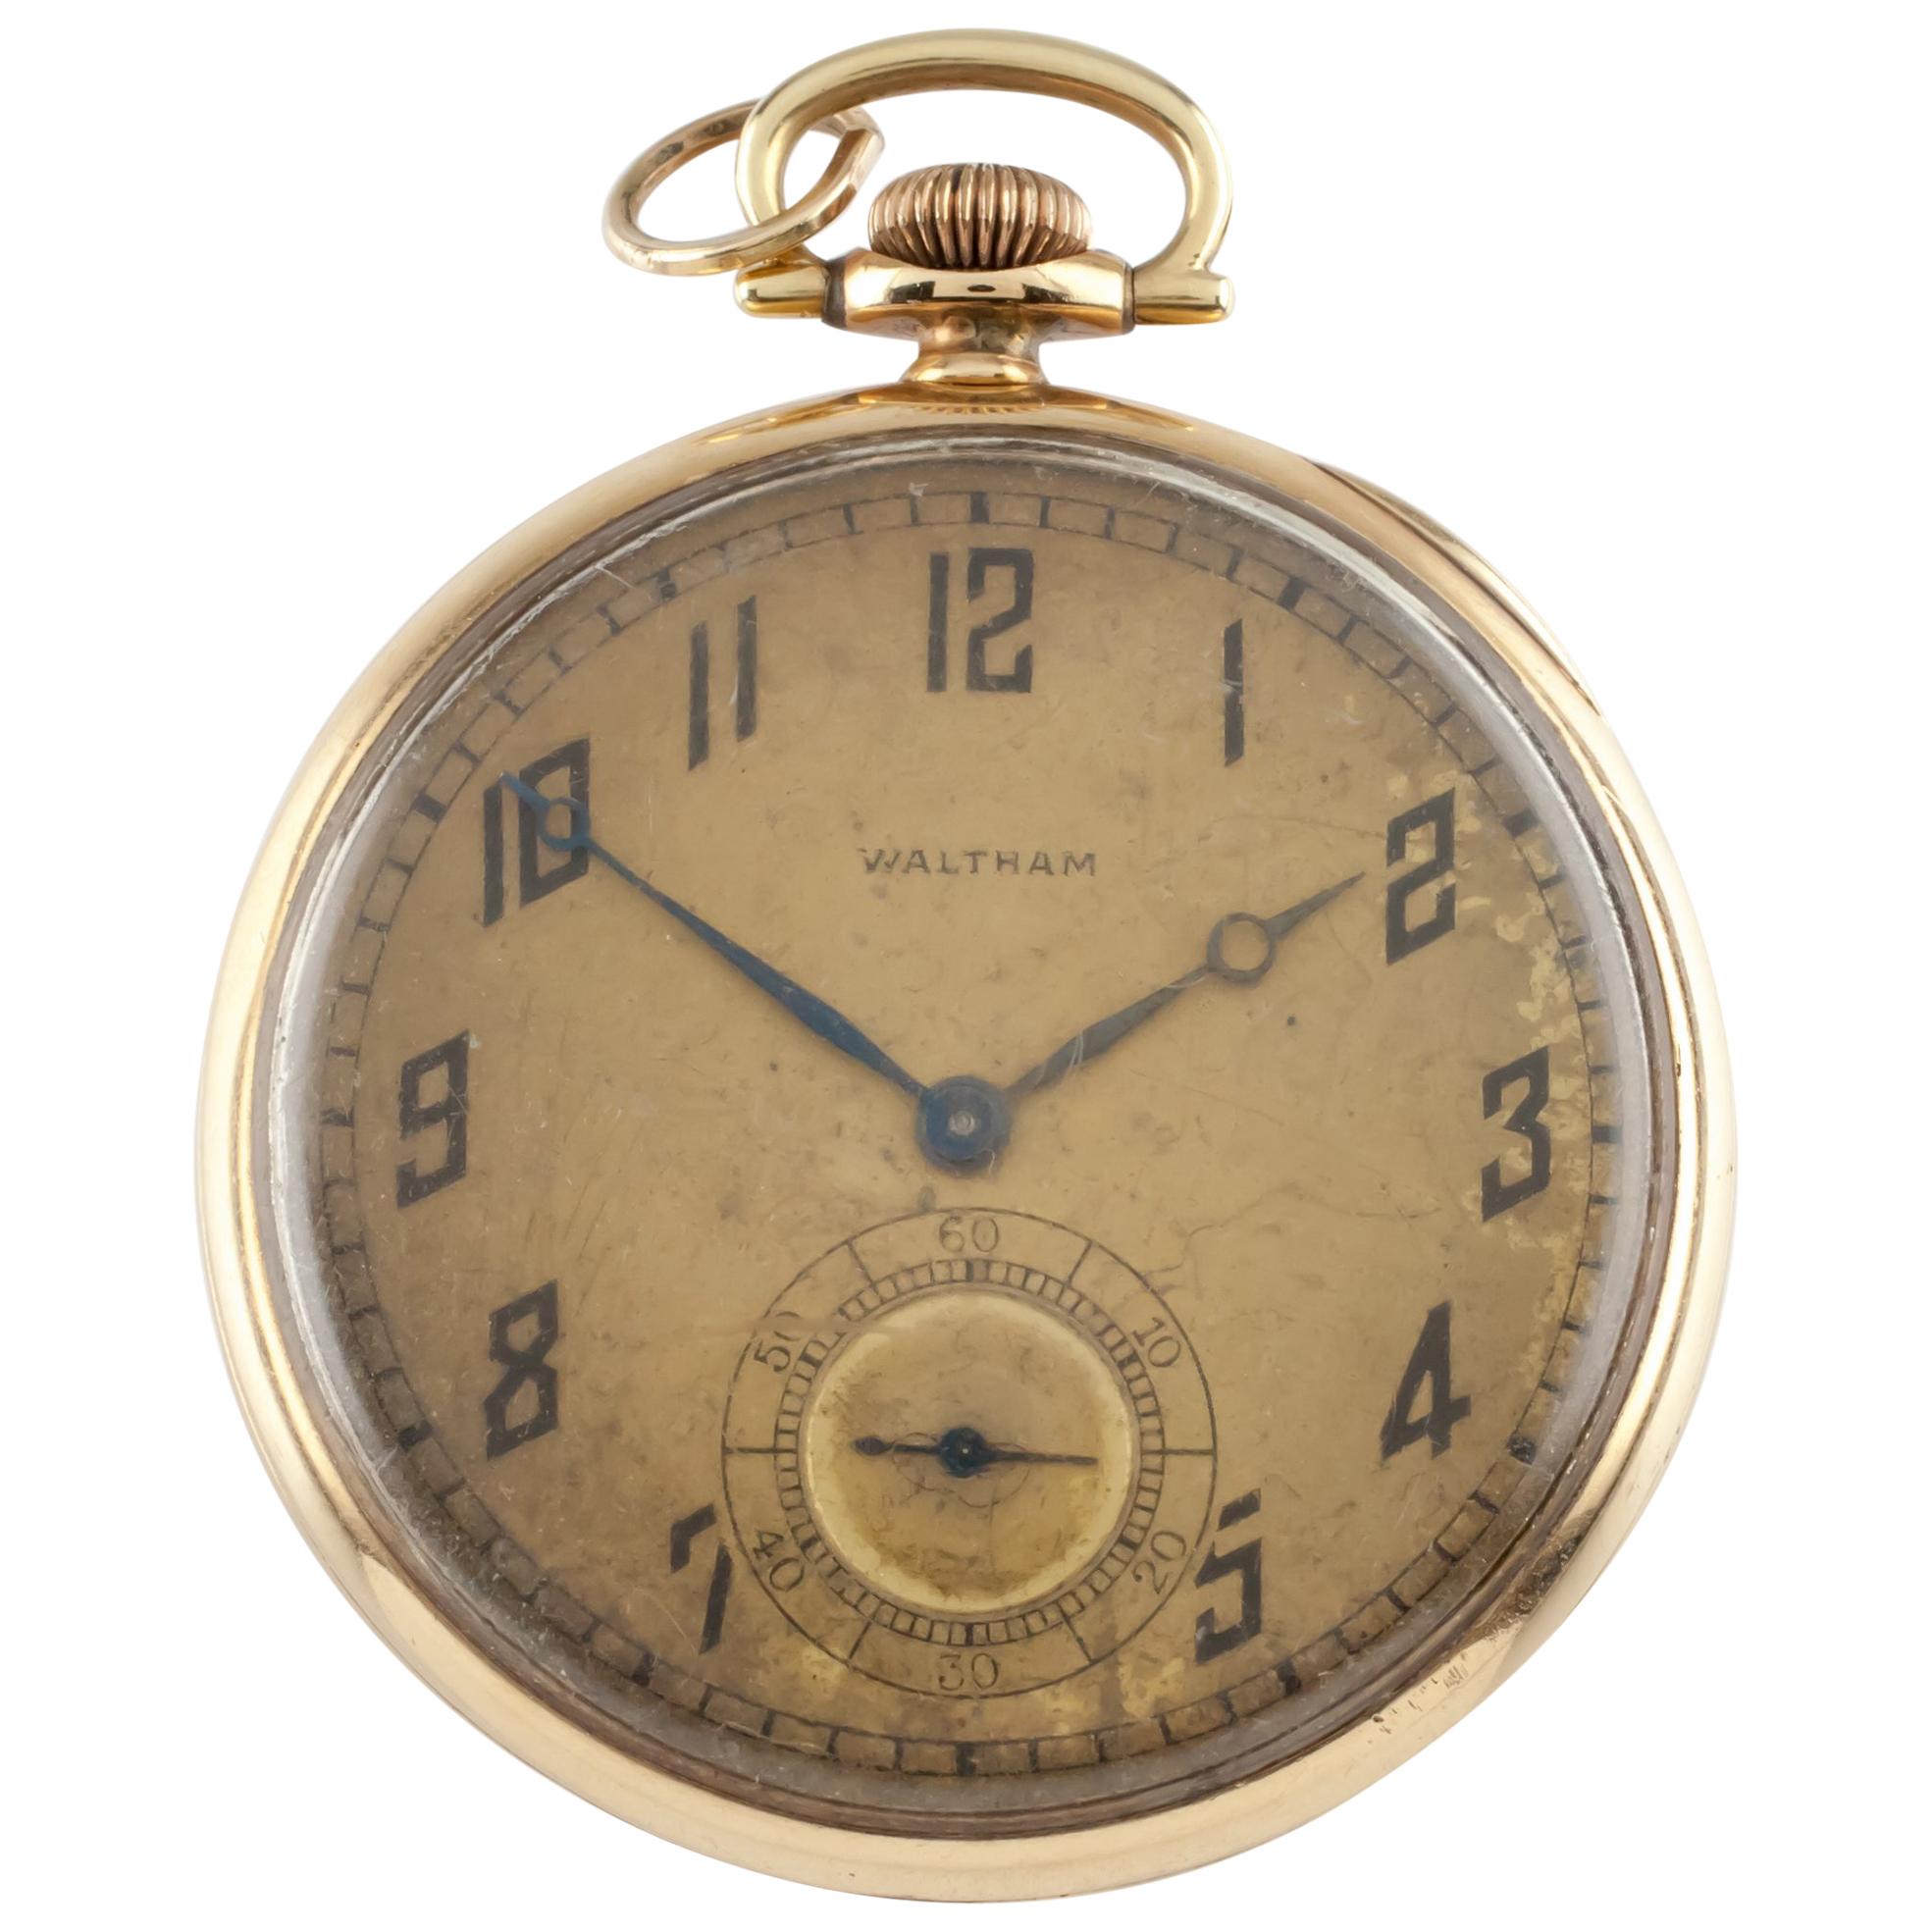 Waltham Colonial Series Open Face 14 Karat Gold Pocket Watch 14s 19 Jewel For Sale